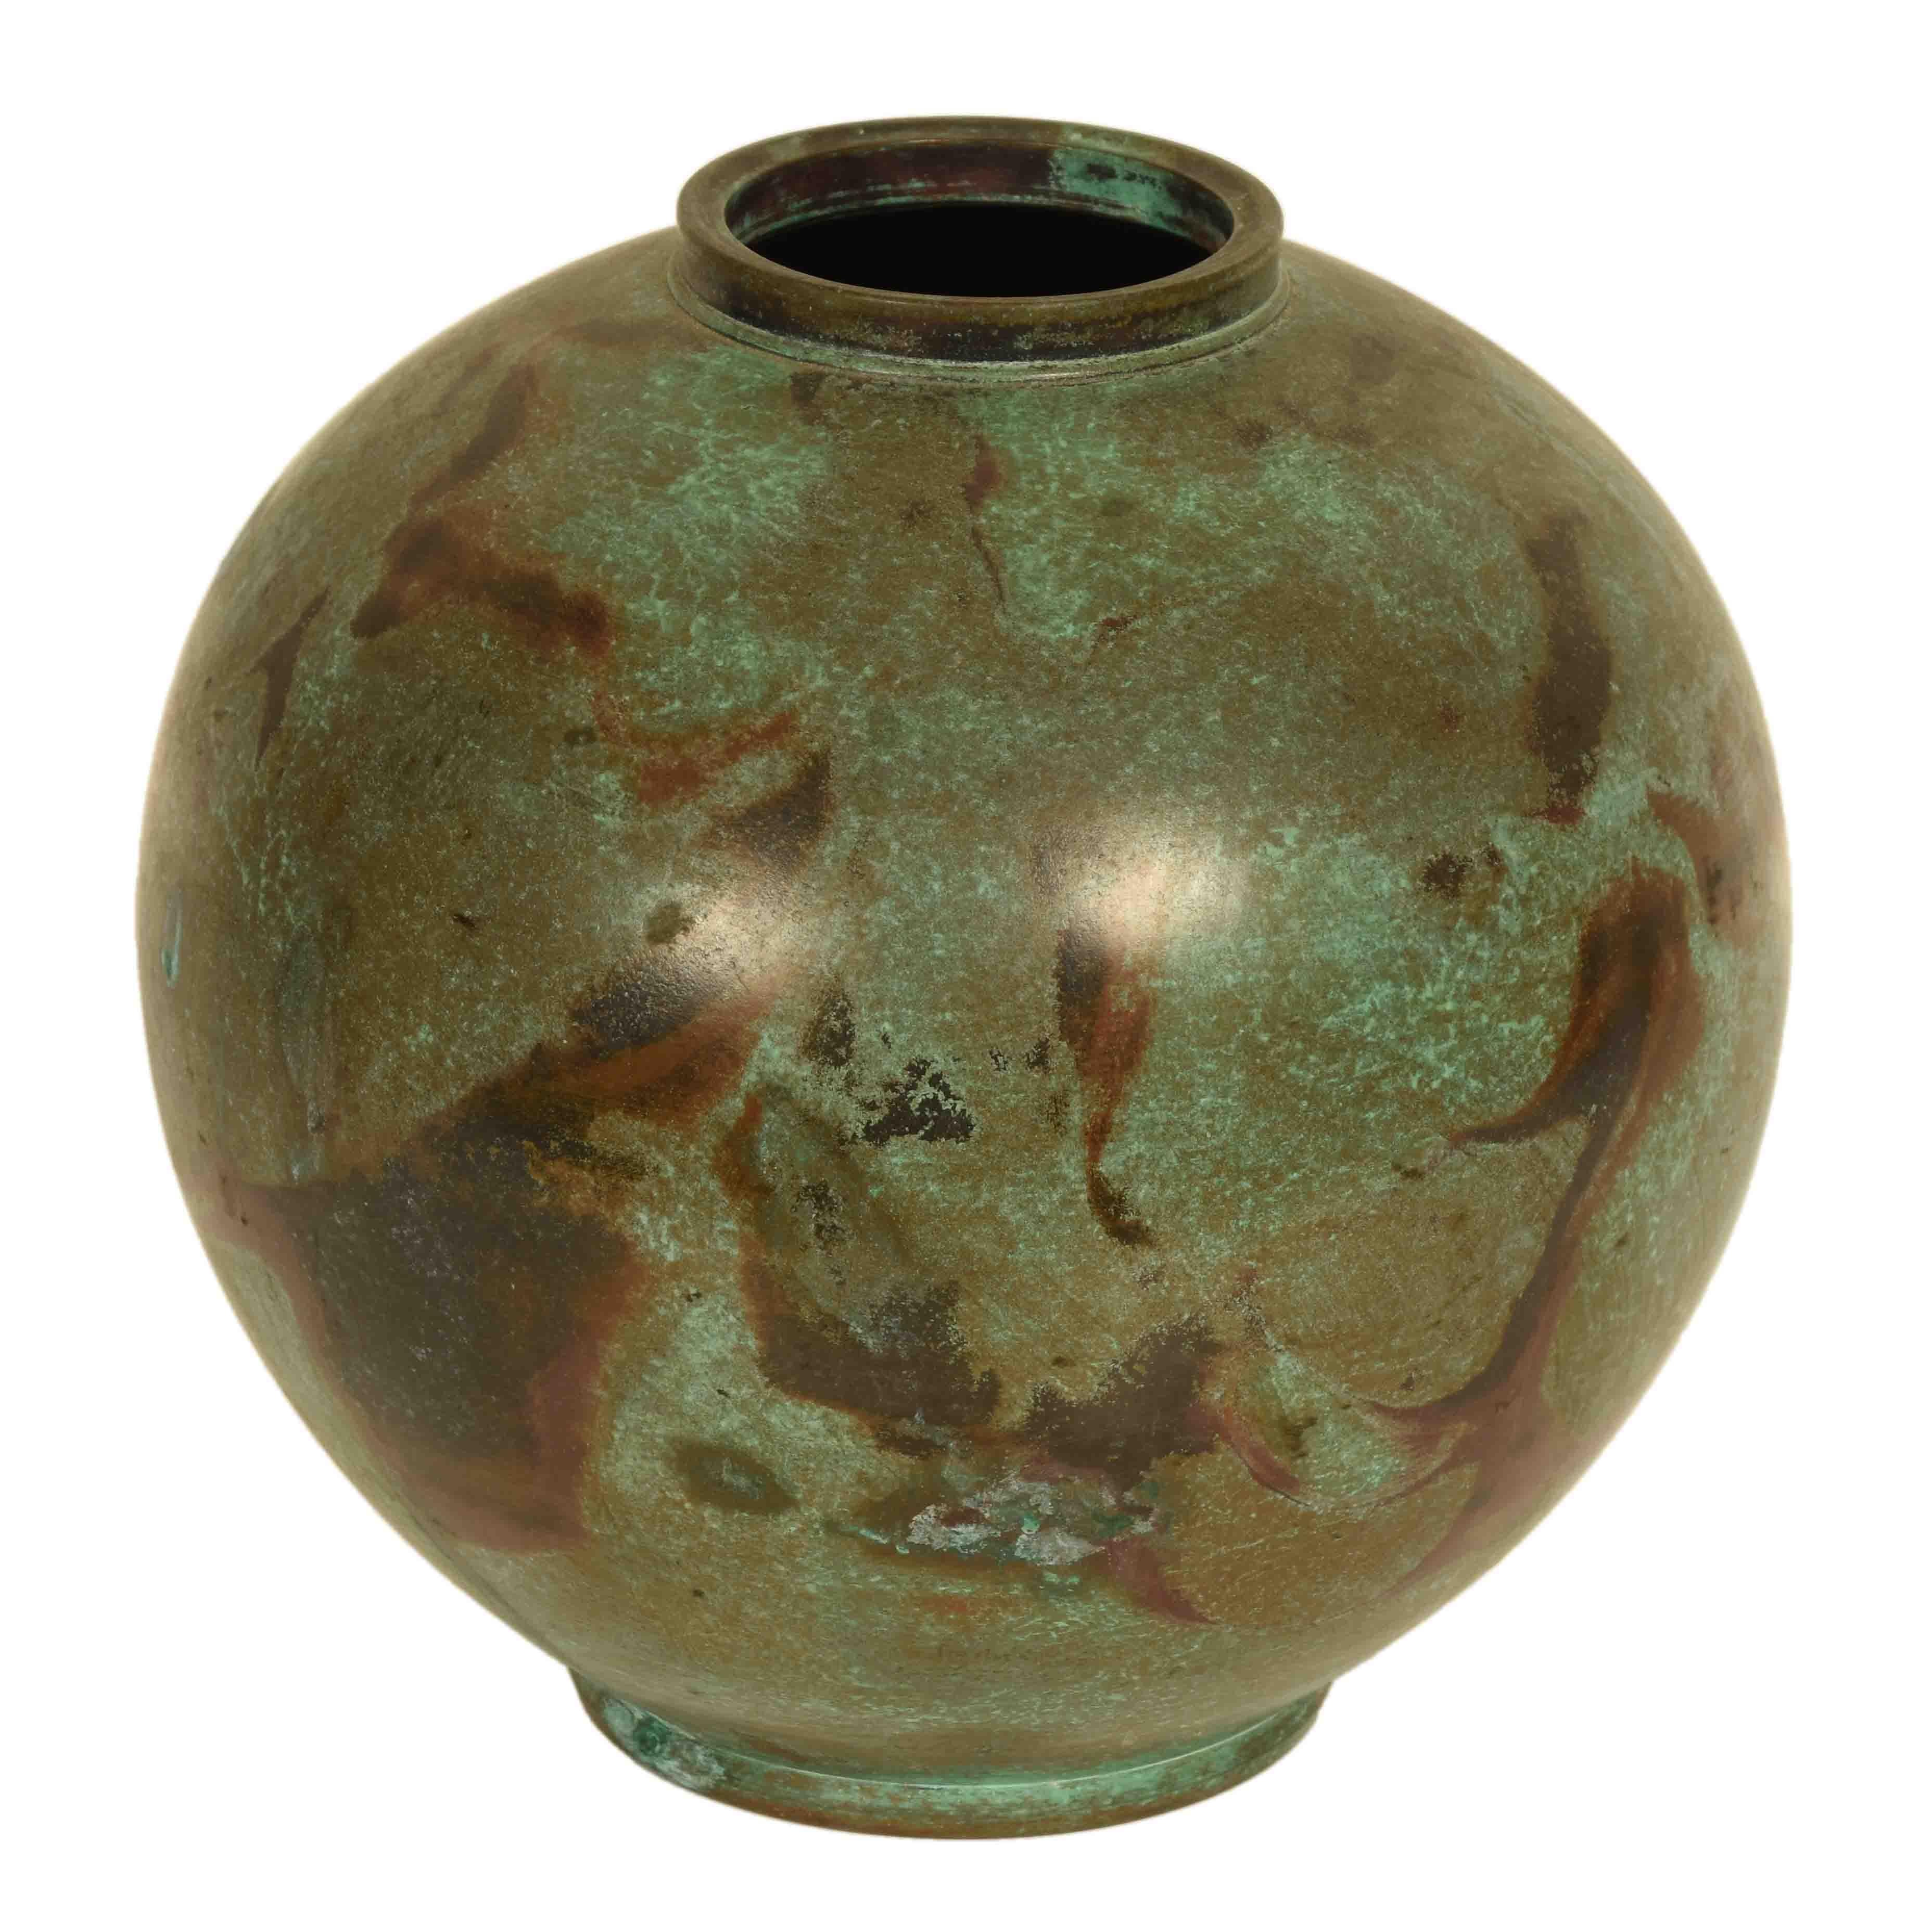 A vintage, Japanese bronze vase from Takaoka. Takaoka is a city on the main island of Honshu. While bronze work originated in China, Japanese artisans have developed an array of techniques in the production of decorative bronzes that have elevated